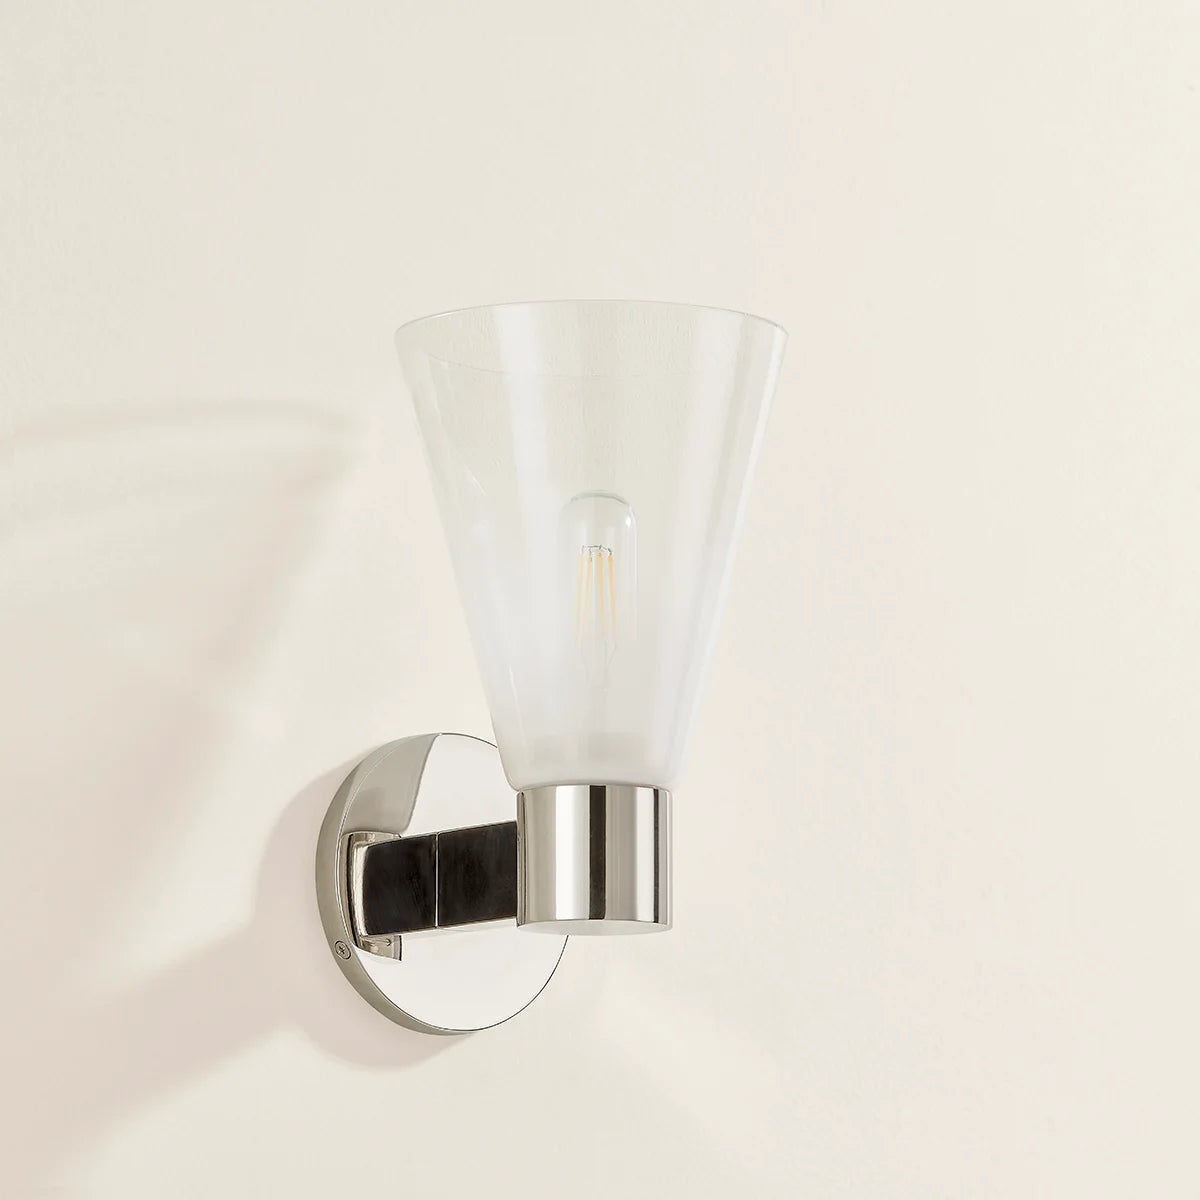 Alma Wall Sconce Small Wall Sconce Polished Nickel 